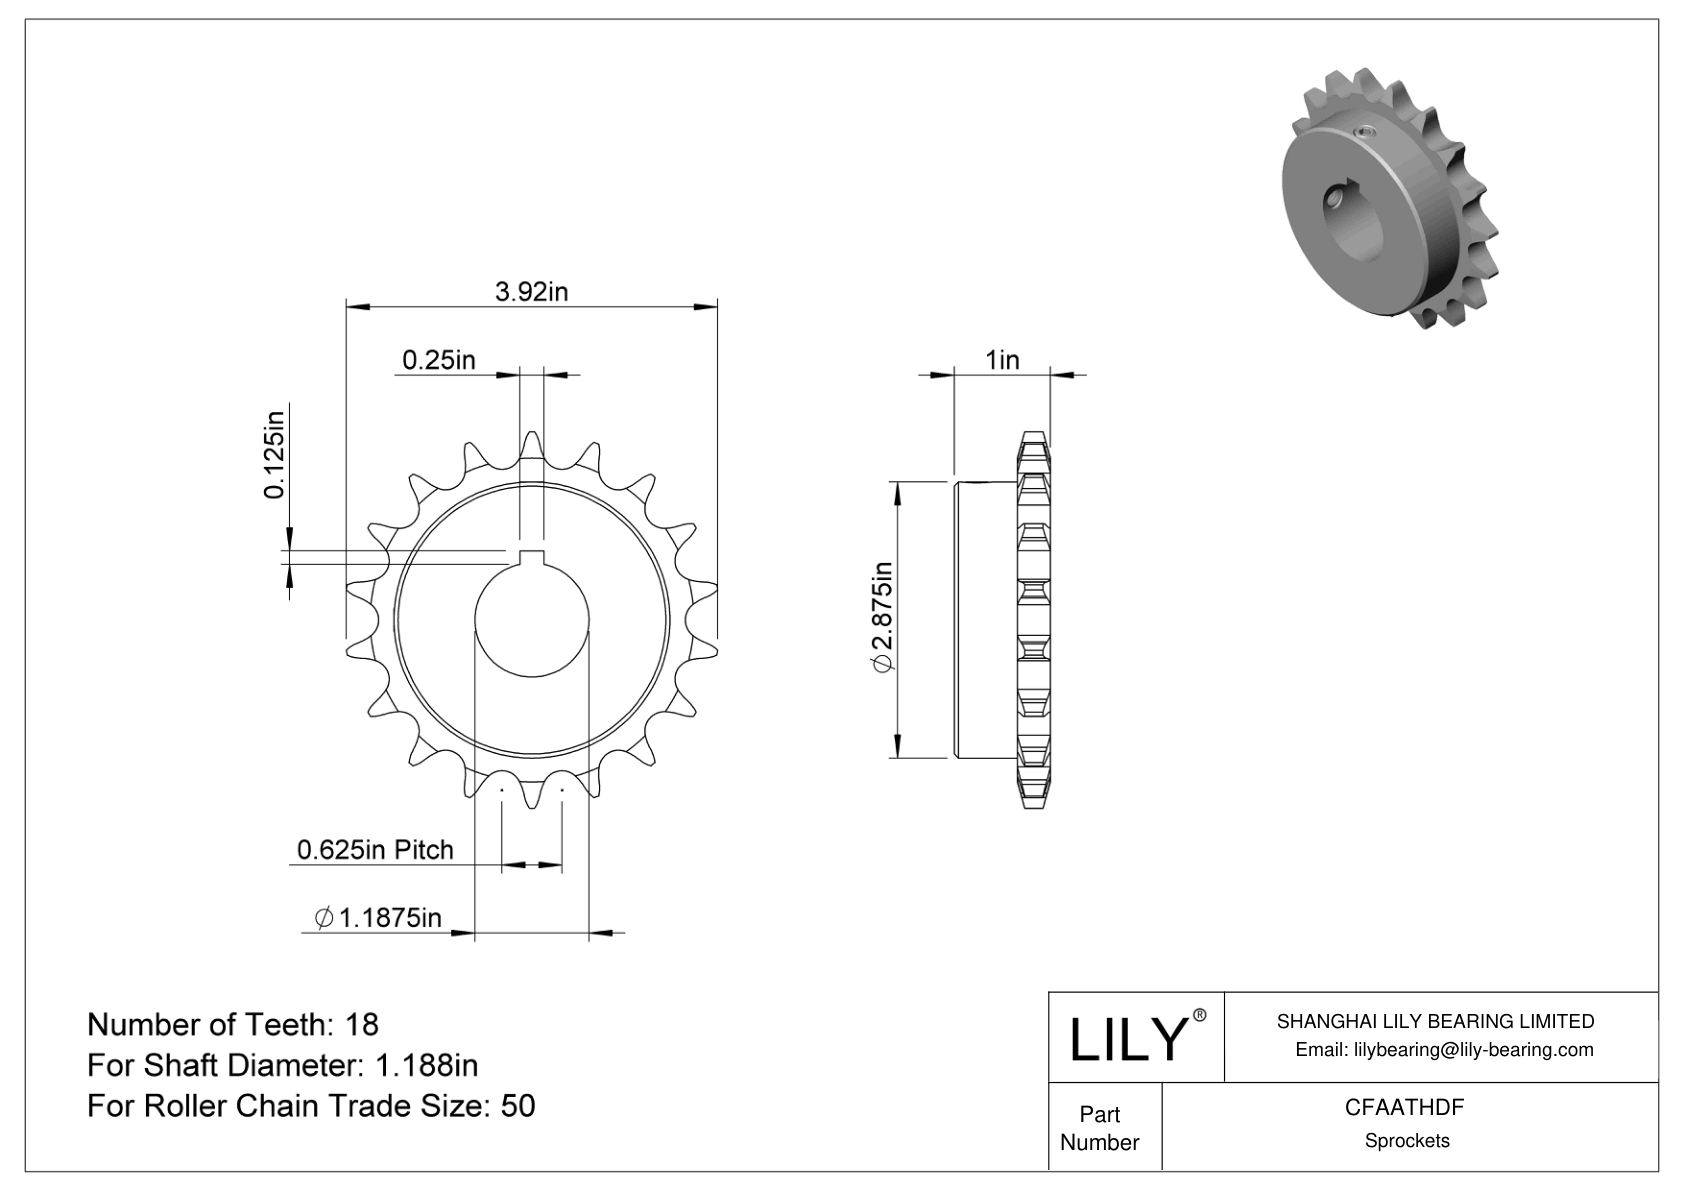 CFAATHDF Wear-Resistant Sprockets for ANSI Roller Chain cad drawing